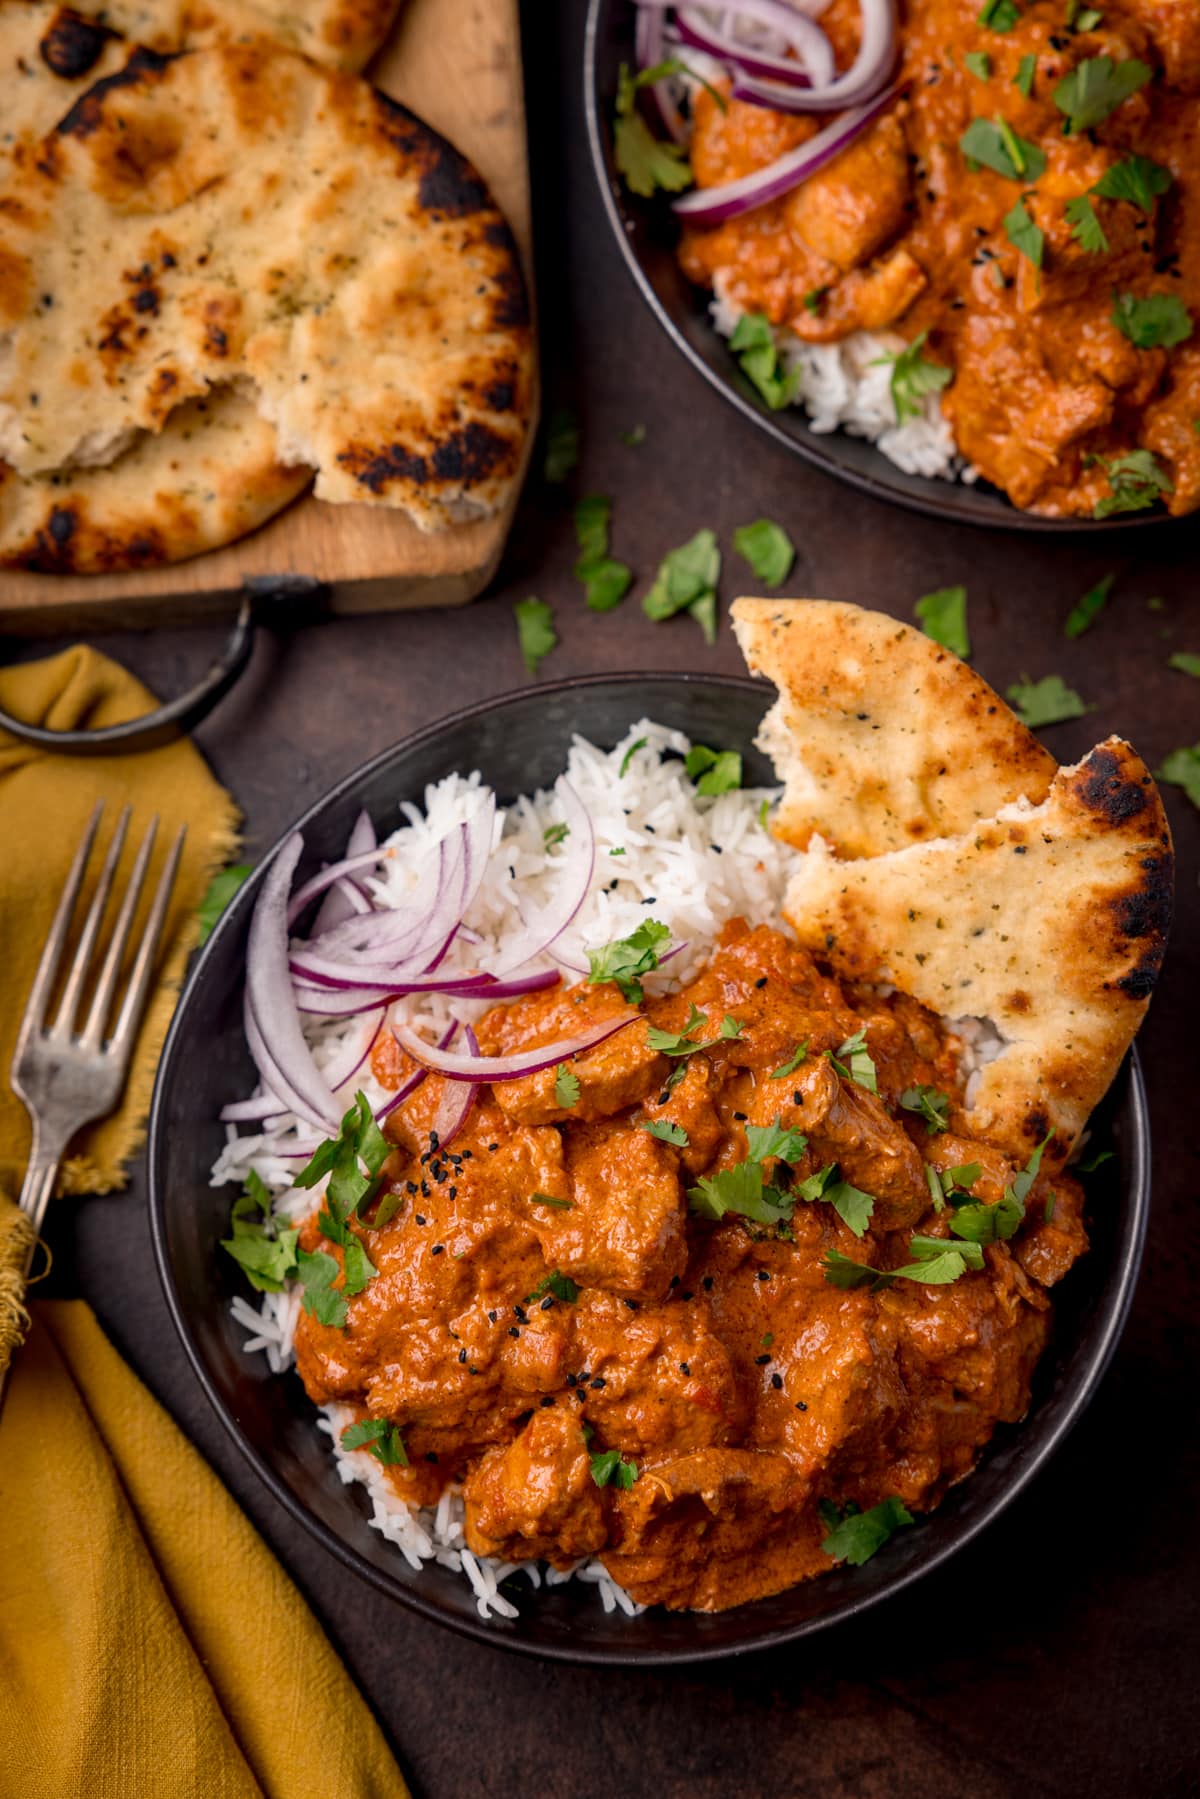 Overhead picture of a dark bowl full of boiled rice and crock pot butter chicken with some sliced red onion and charred naan bread in the corner of the bowl, with a fork and a board with more naan bread in the background.